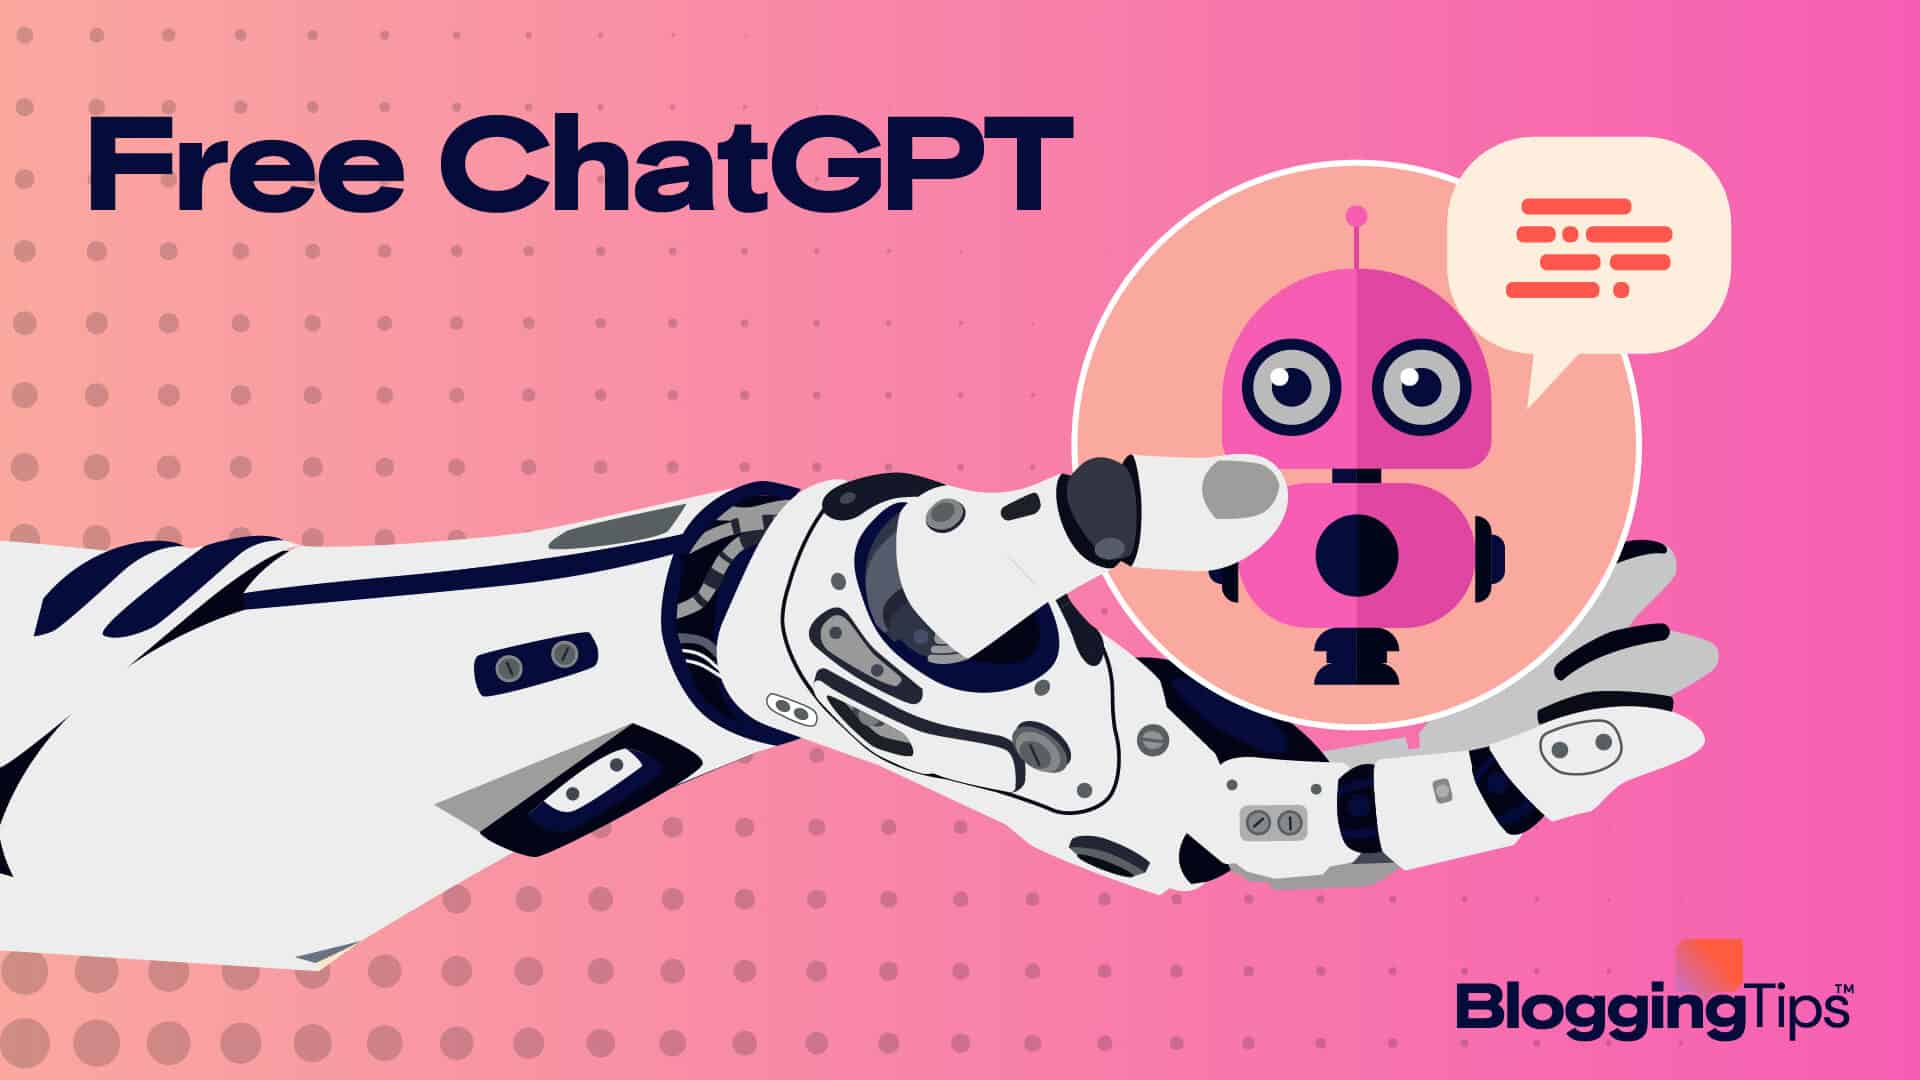 vector graphic showing an illustration of a robotic hand using chatgpt free